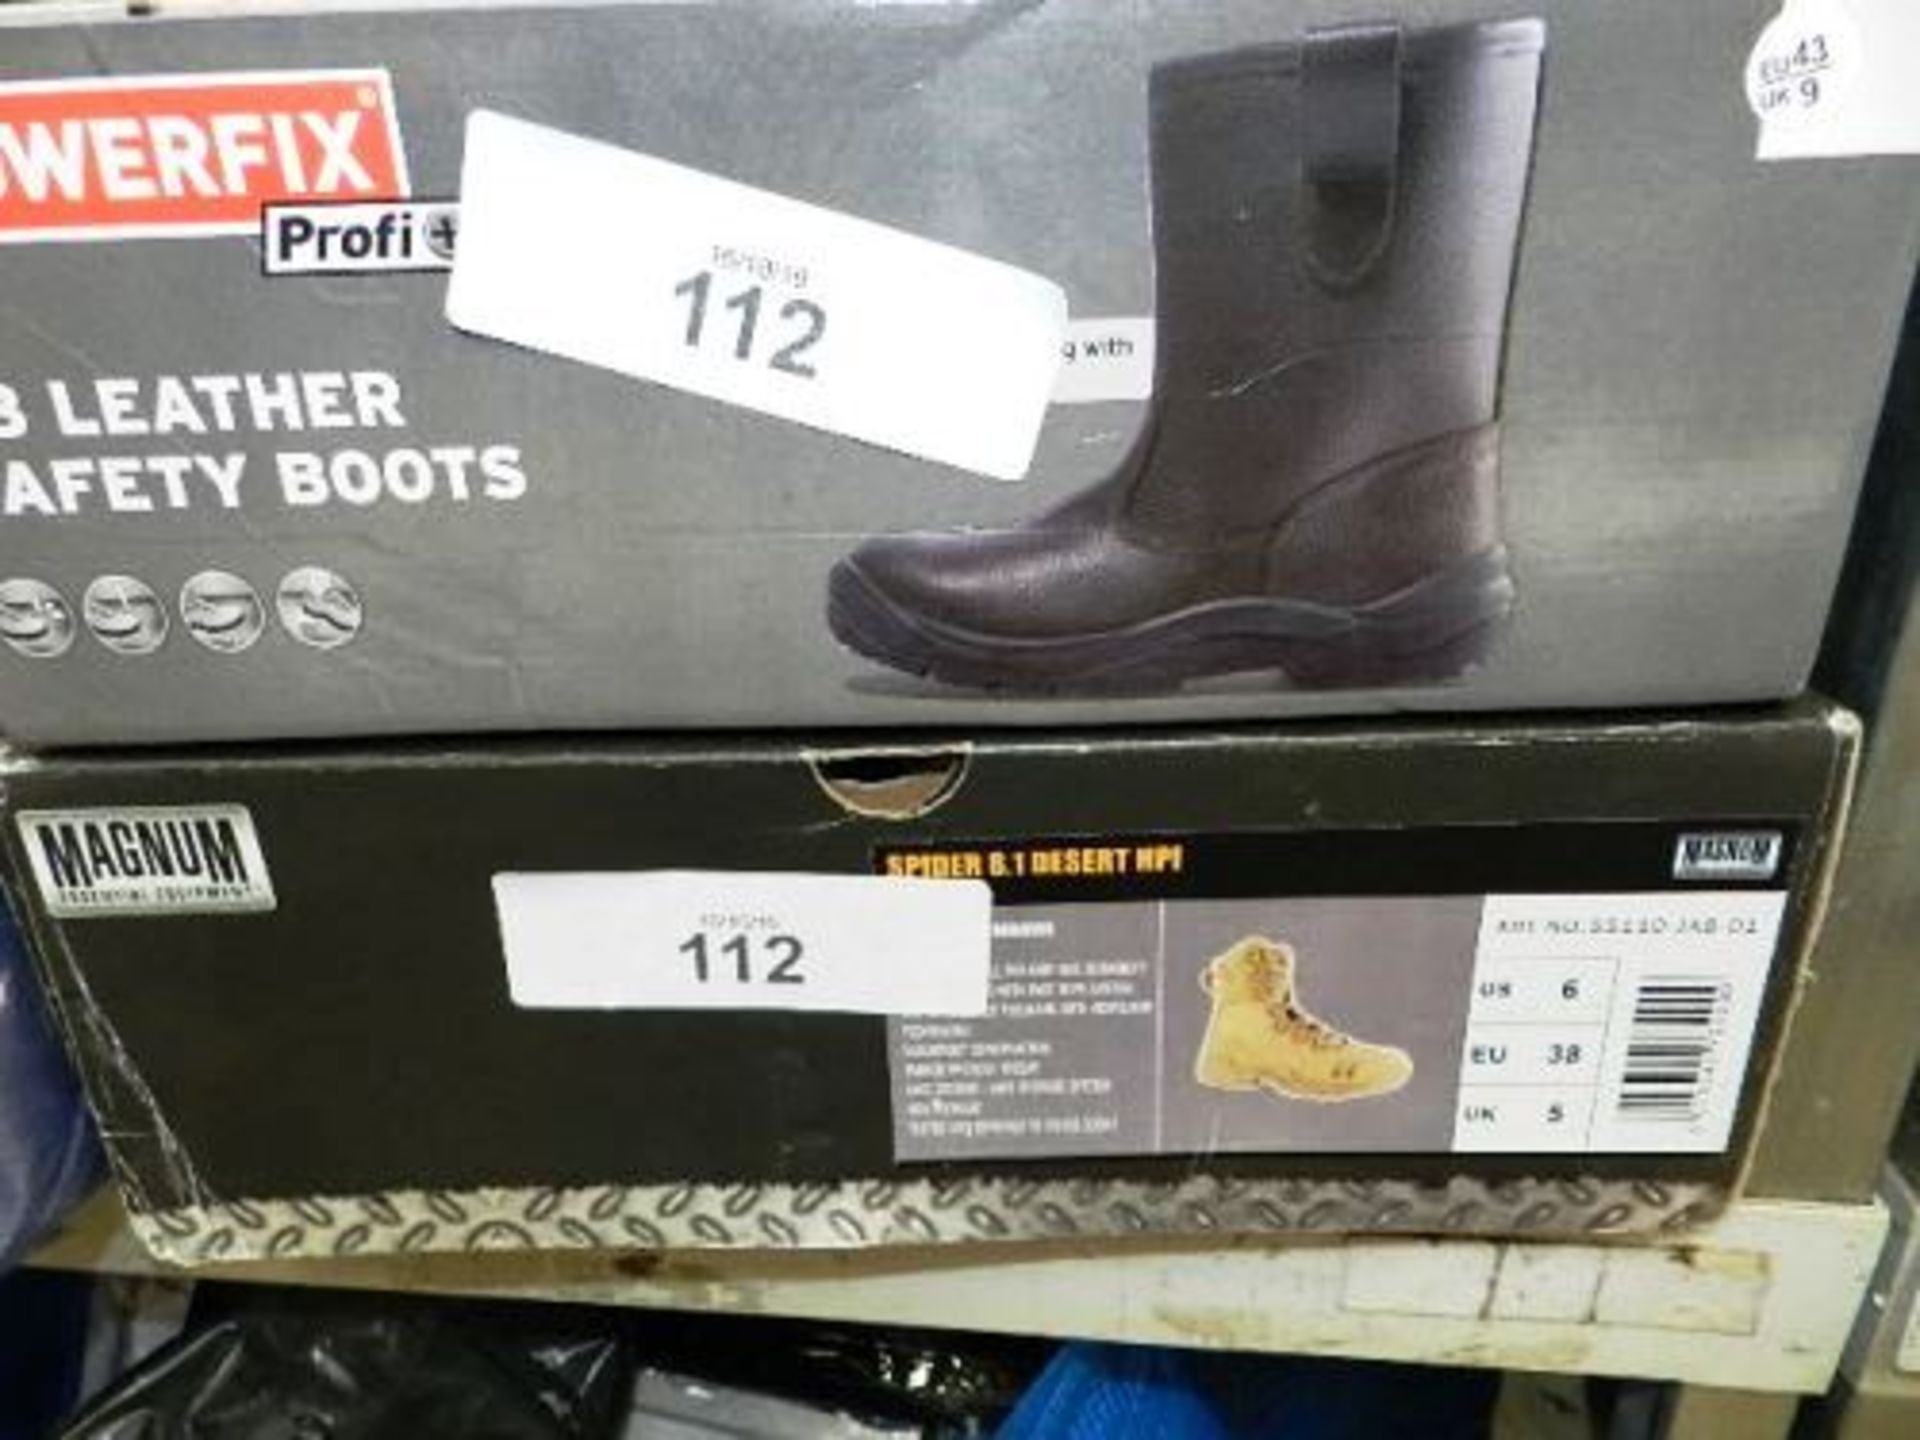 1 x pair Power Fix safety boots, size 9 and 1 x pair Magnum Desert boots, size 5 - New (esb14c)